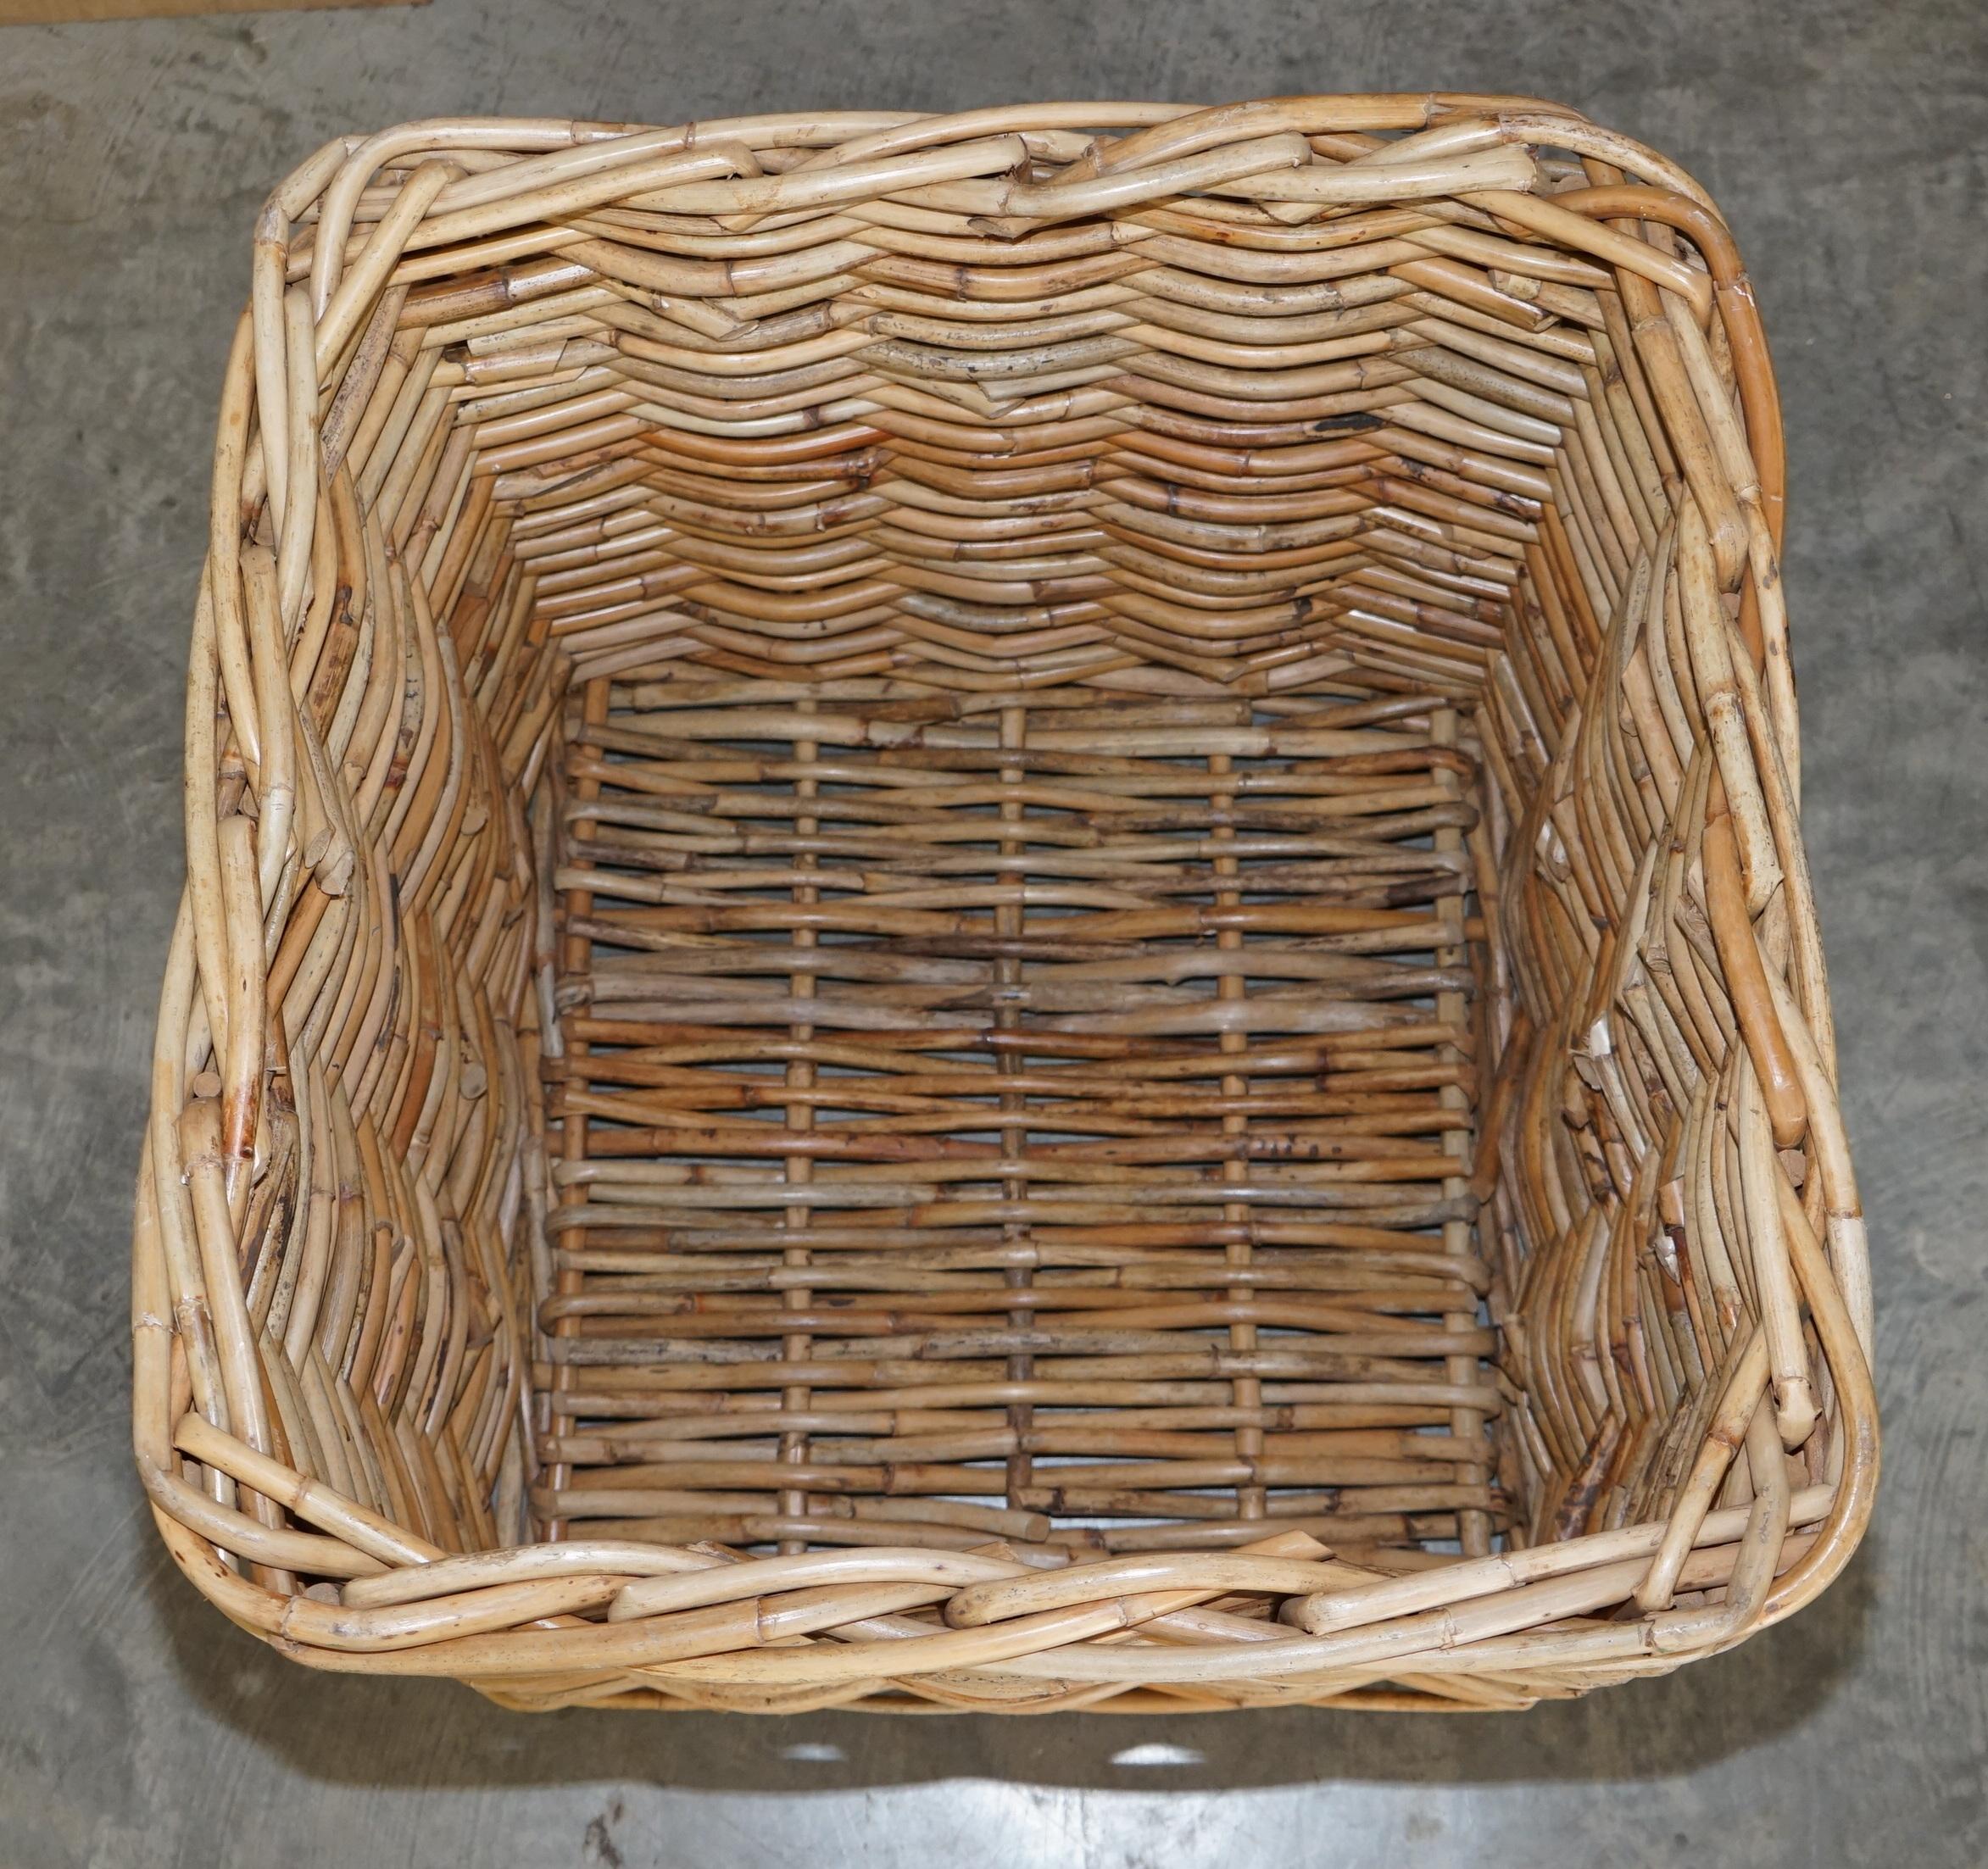 Country Stunning Huge Vintage Wicker Rattan Log or Linen Laundry Basket for Fabric Rolls